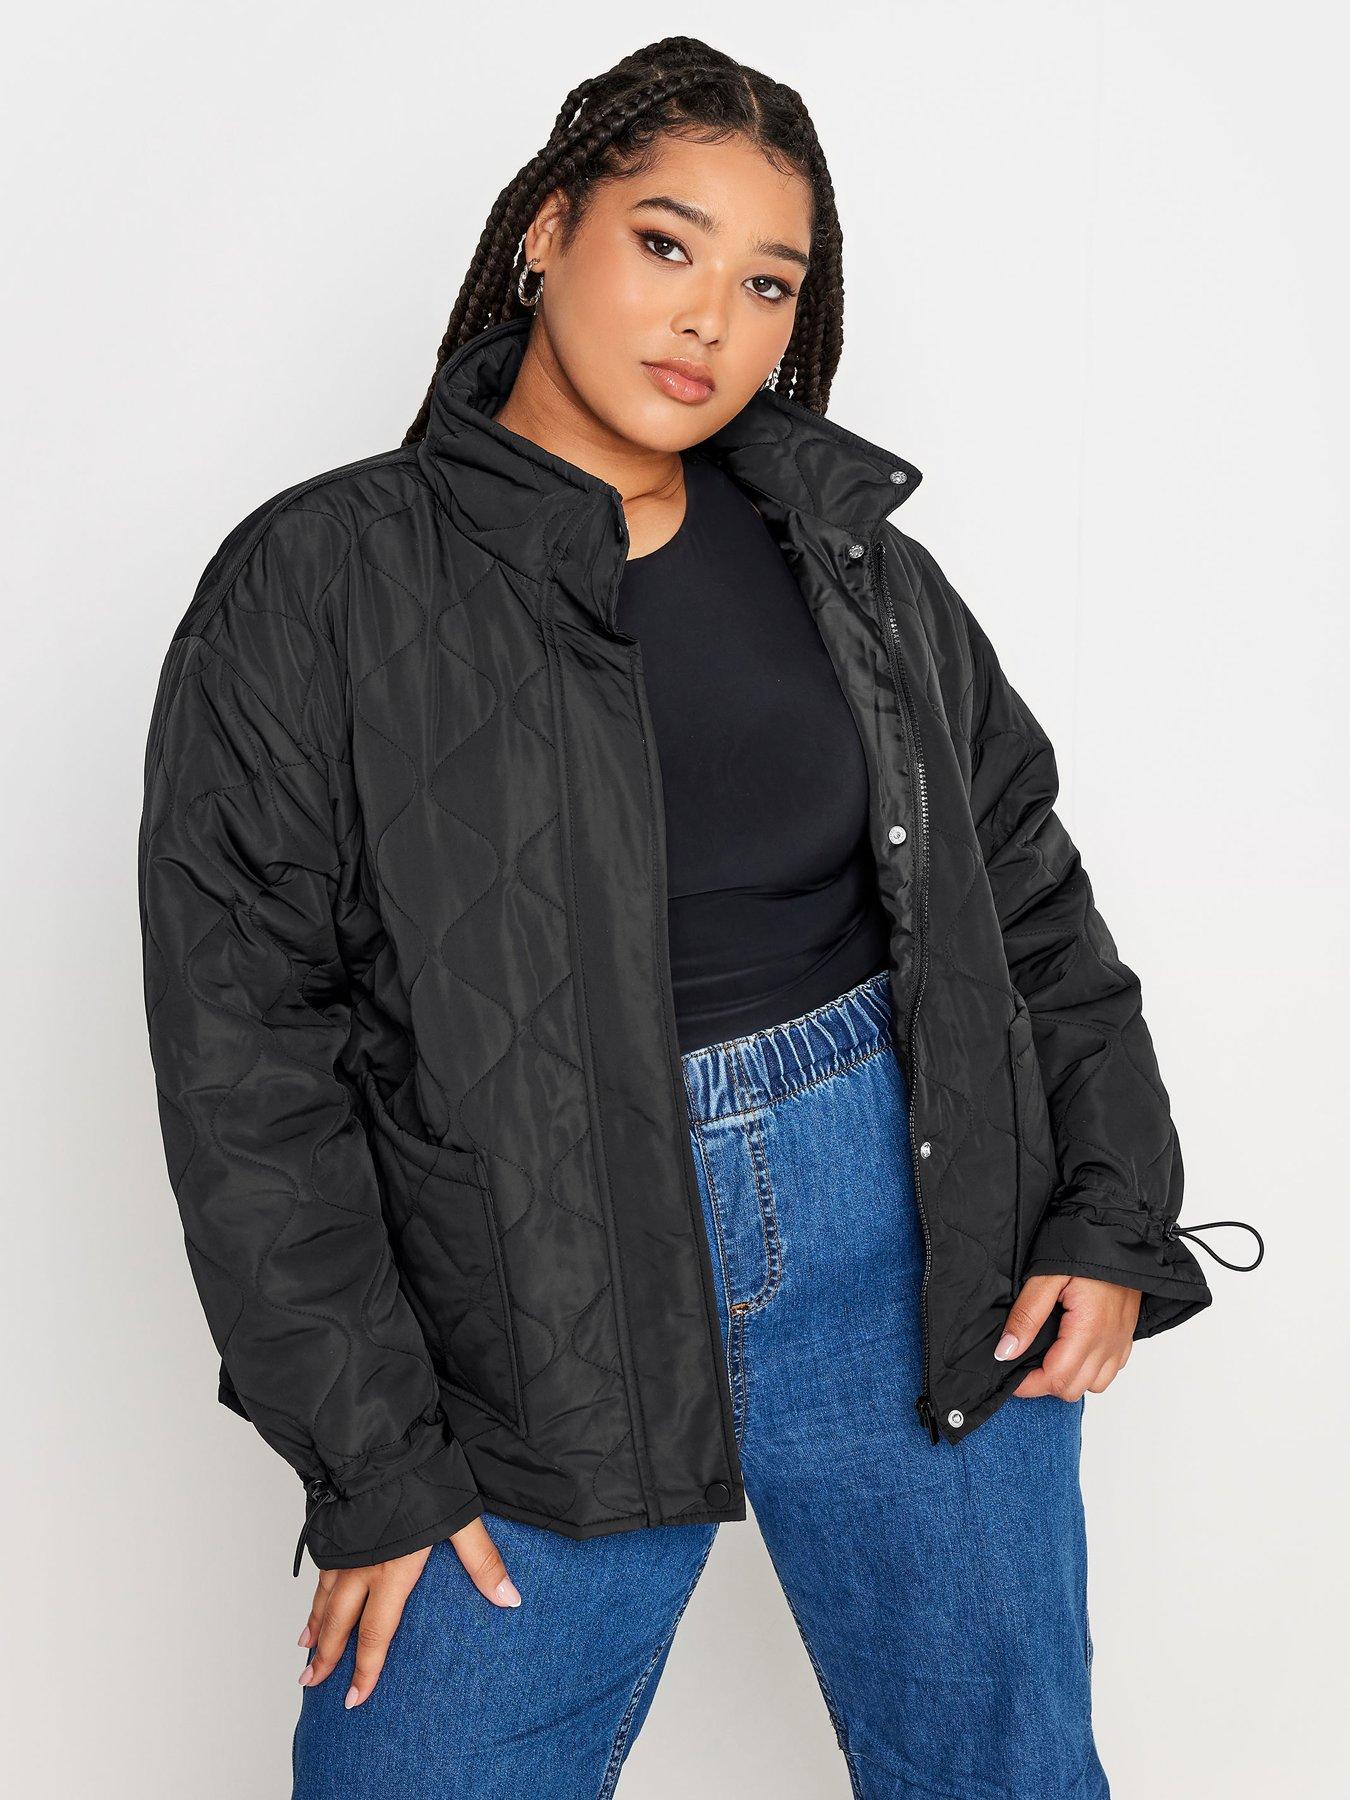 YOURS Plus Size Curve Black Quilted Faux Leather Bomber Jacket